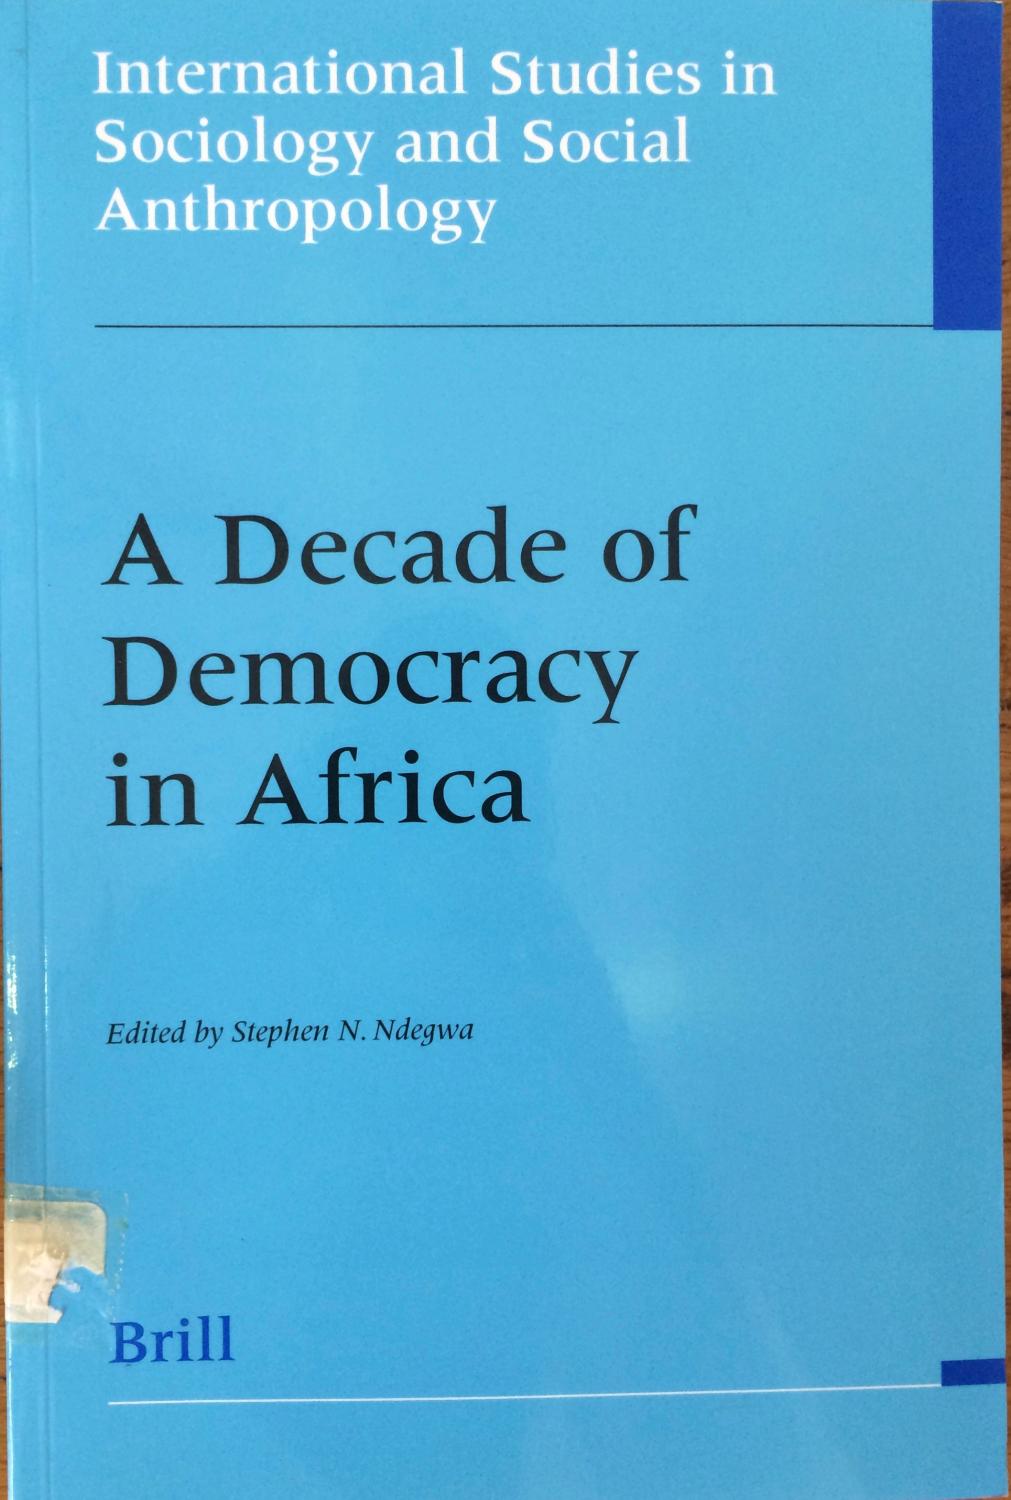 A Decade of Democracy in Africa (International studies in sociology and social anthropology, v. 81.) - Stephen N. Ndegwa (ed.)